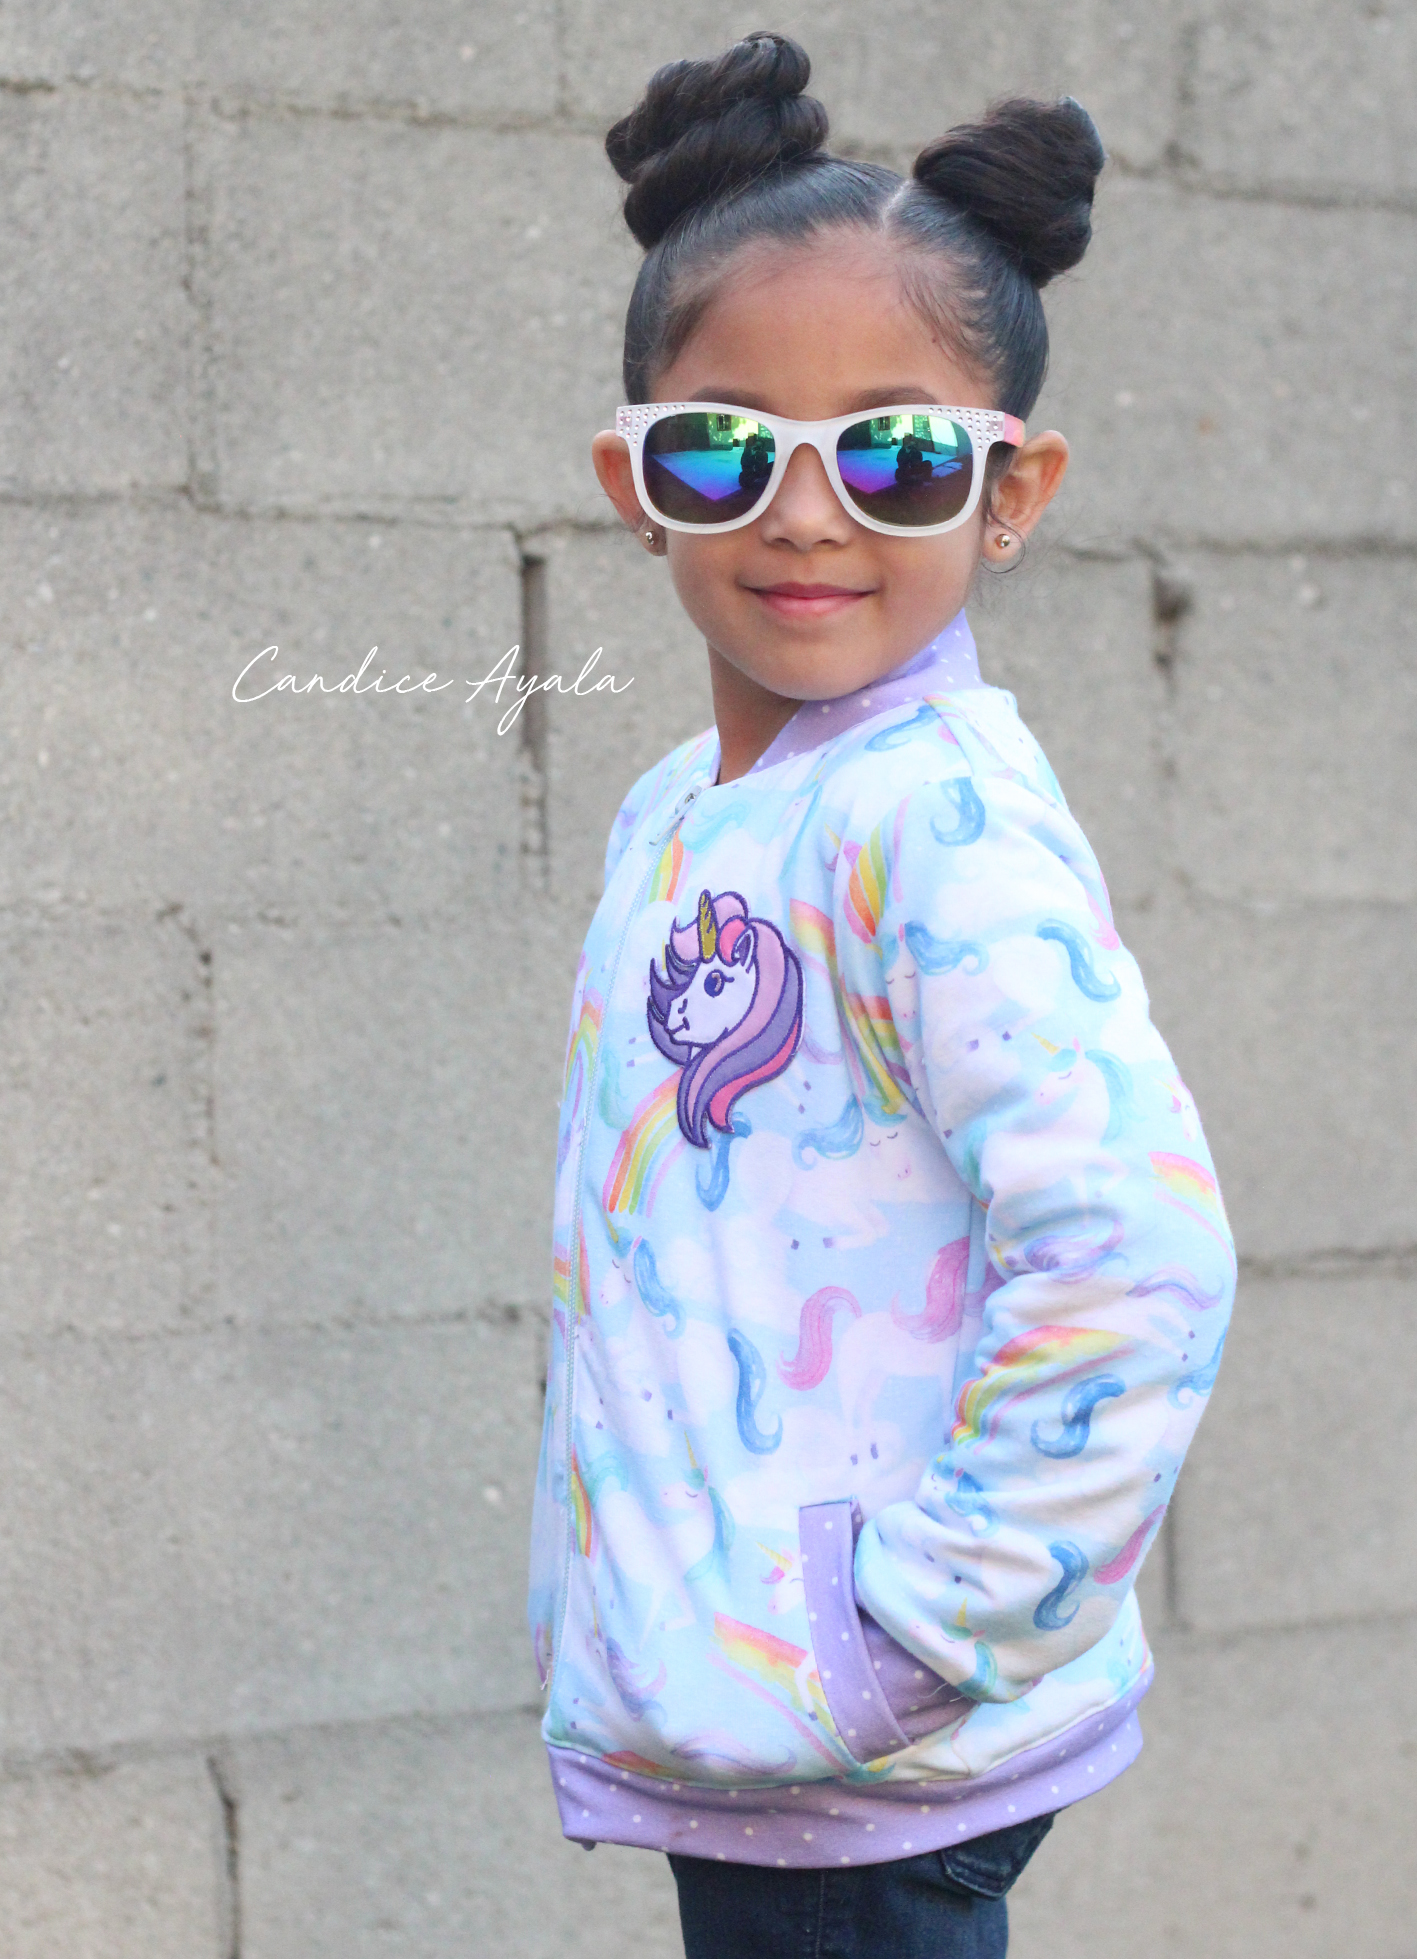 The Ollie Bomber Jacket PDF Pattern by Sew A Little Seam sewn by Candice Ayala.